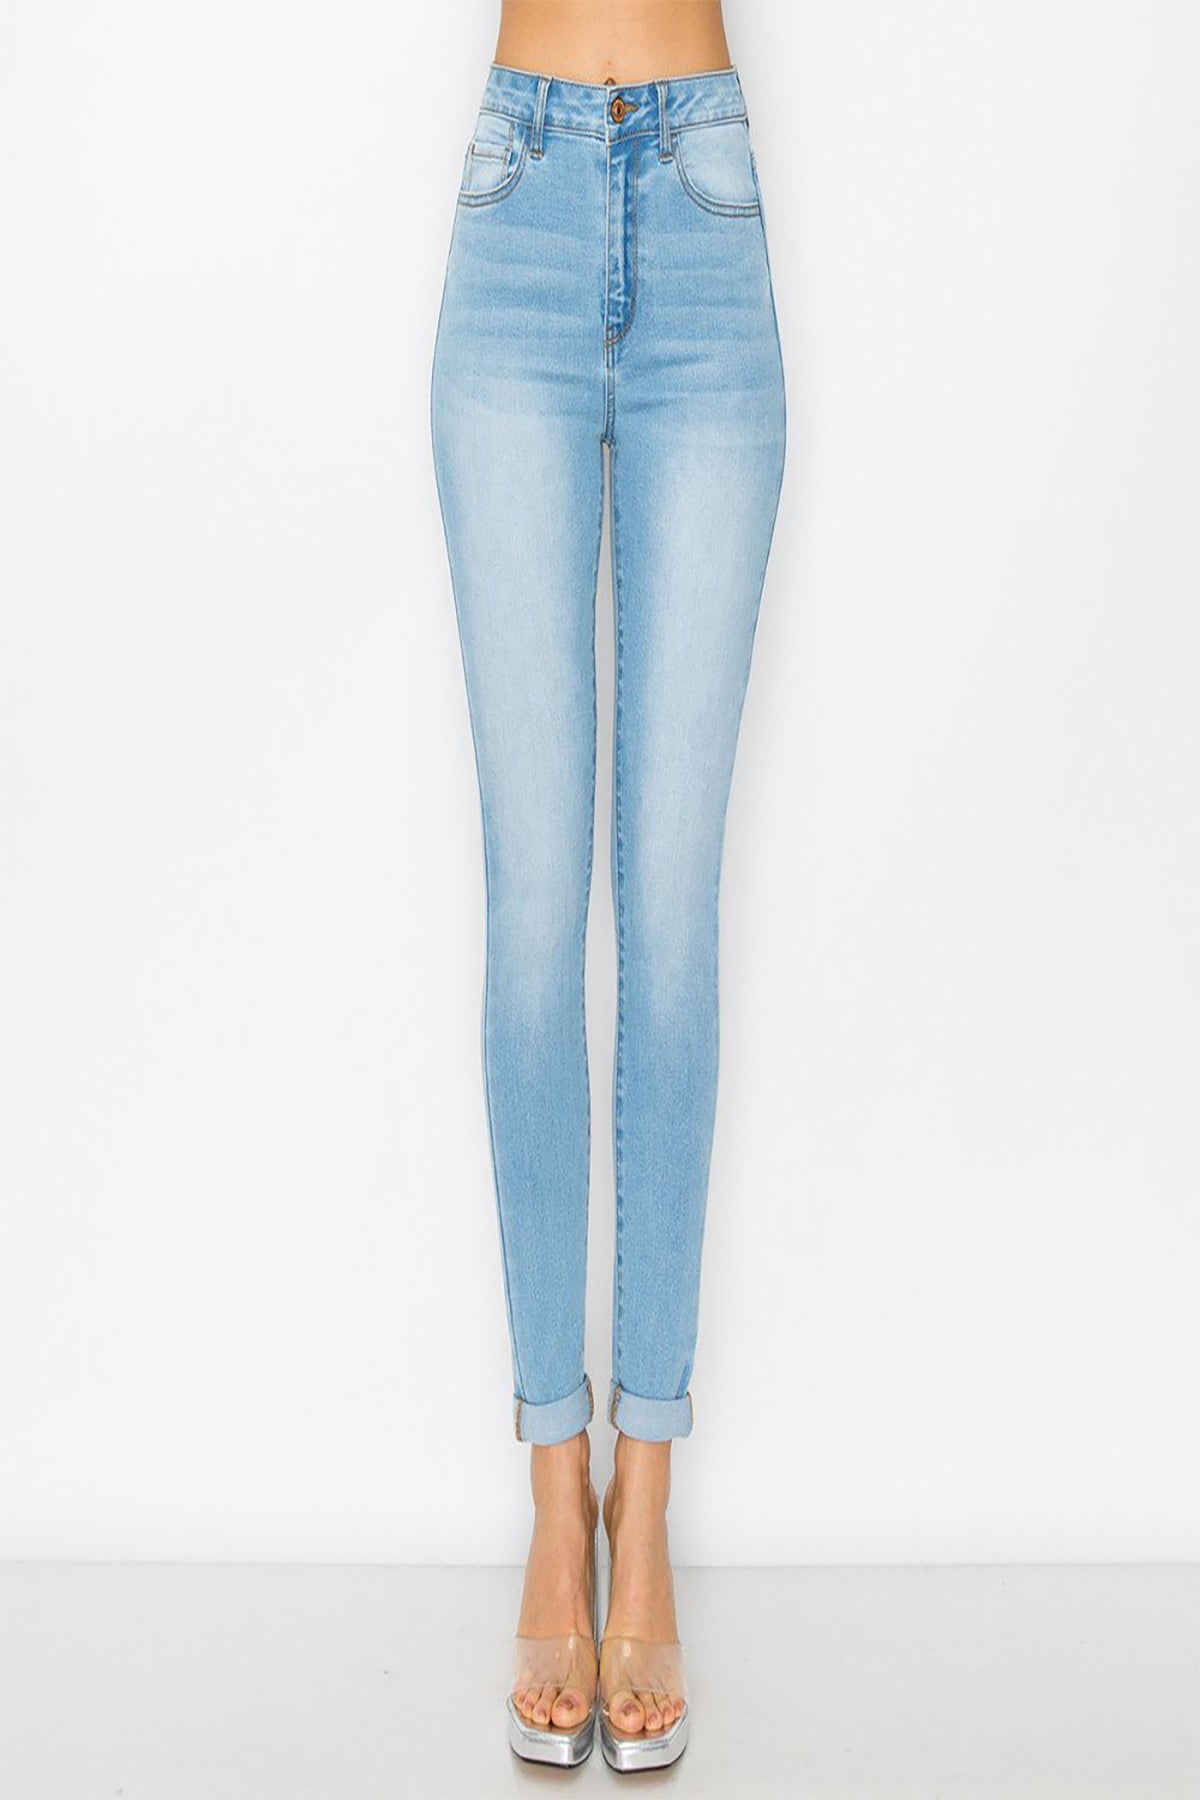 RAYON HIGH RISE SKINNY DENIM PANTS WITH ROLLED CUFF 1-1-2-2-3-2-2-2